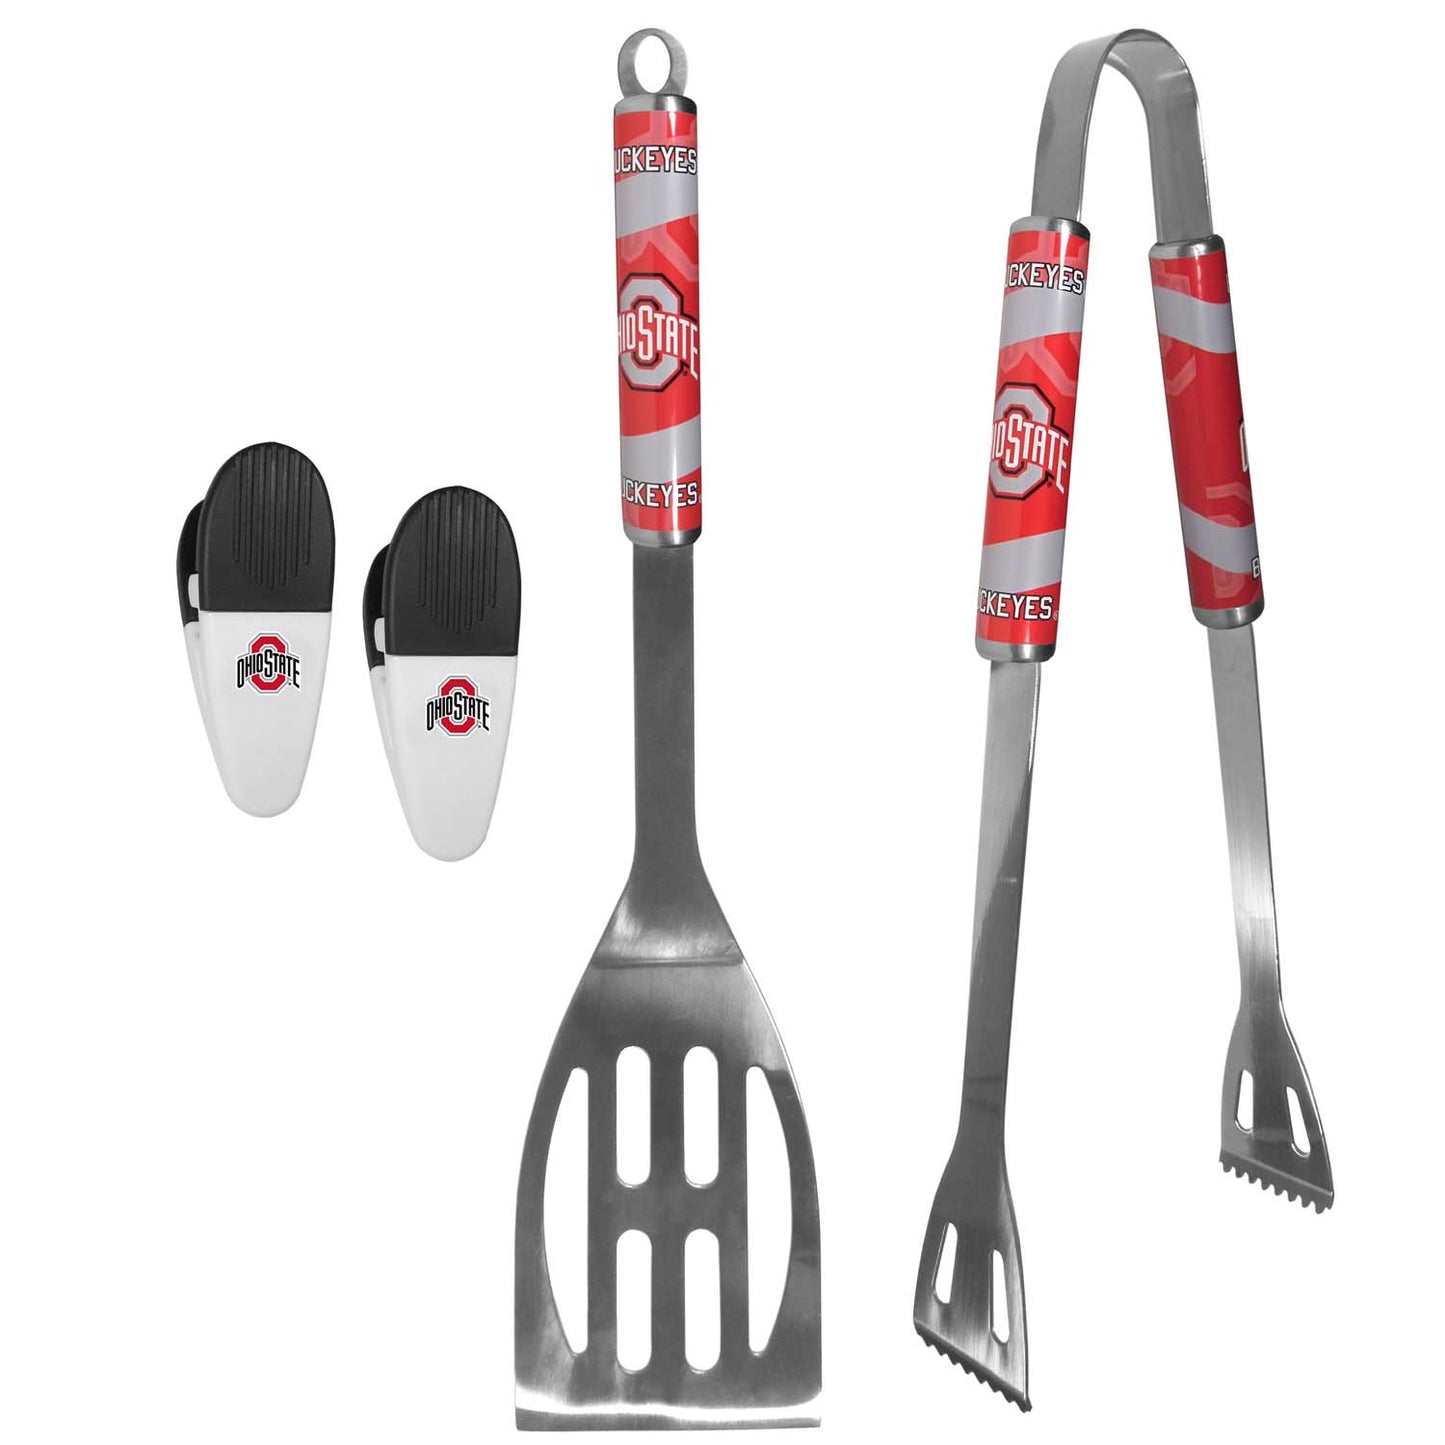 Ohio State Buckeyes Collegiate University Two Piece Grilling Tools Set with 2 Magnet Chip Clips - Chrome